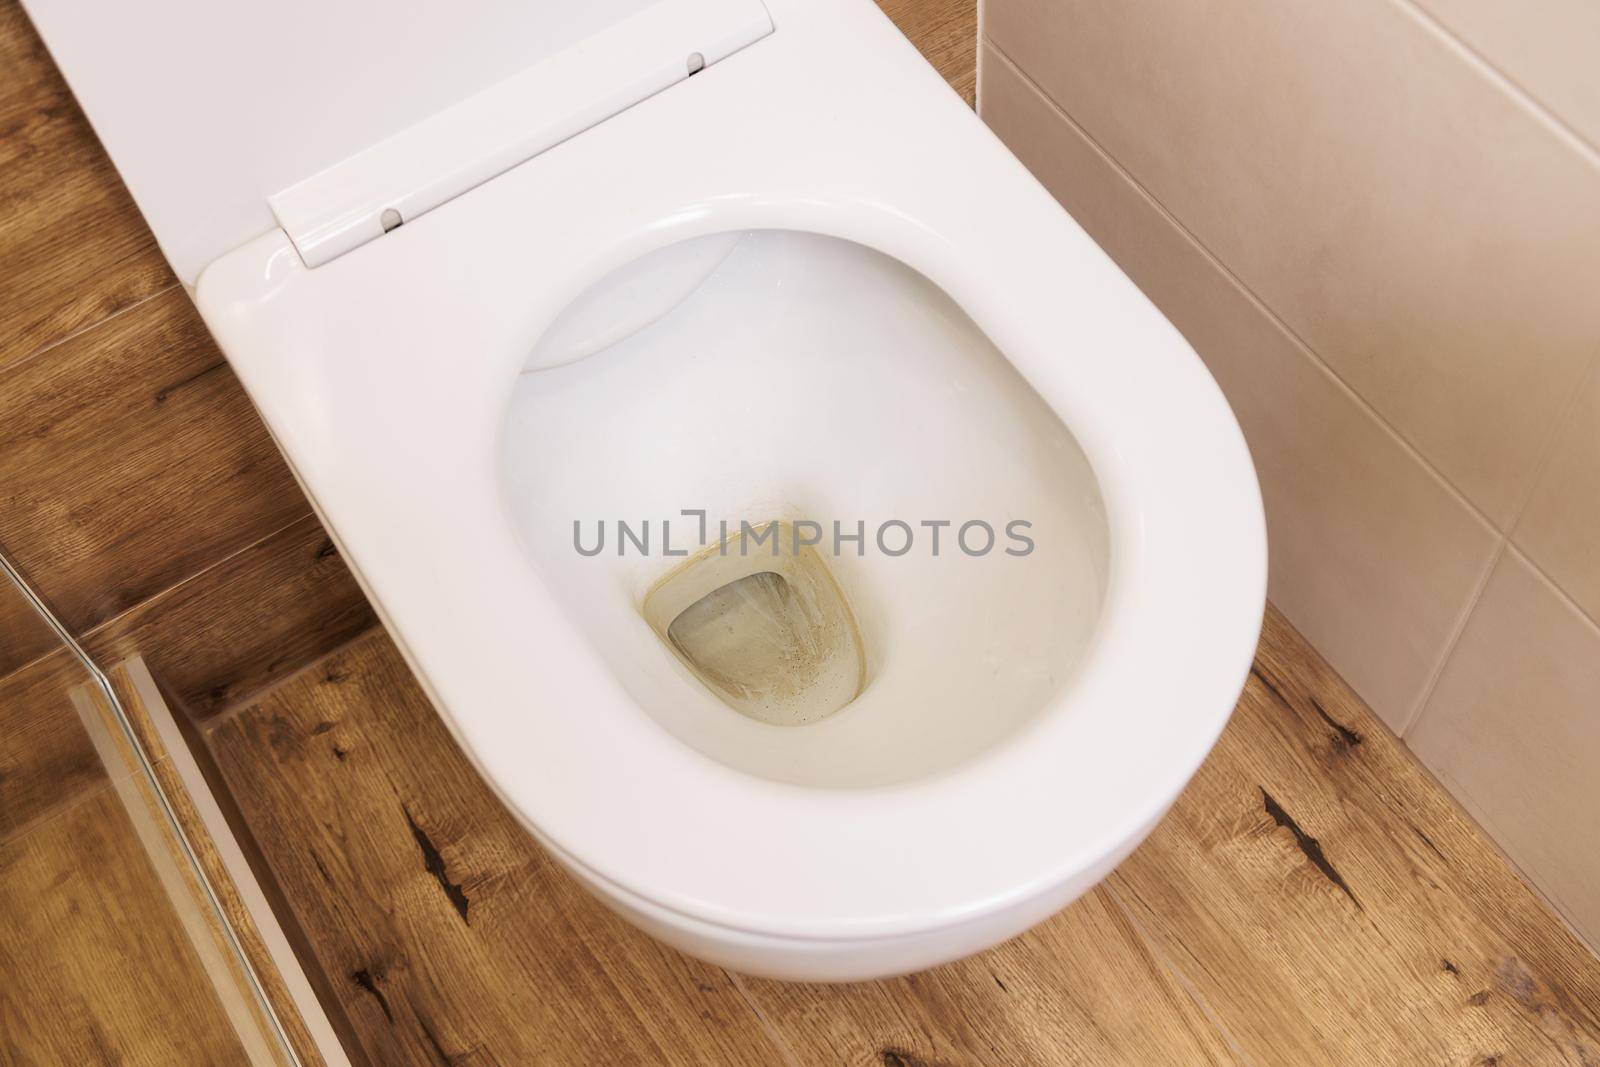 Dirty unhygienic toilet bowl with a lime stain in the toilet close-up by Ramanouskaya